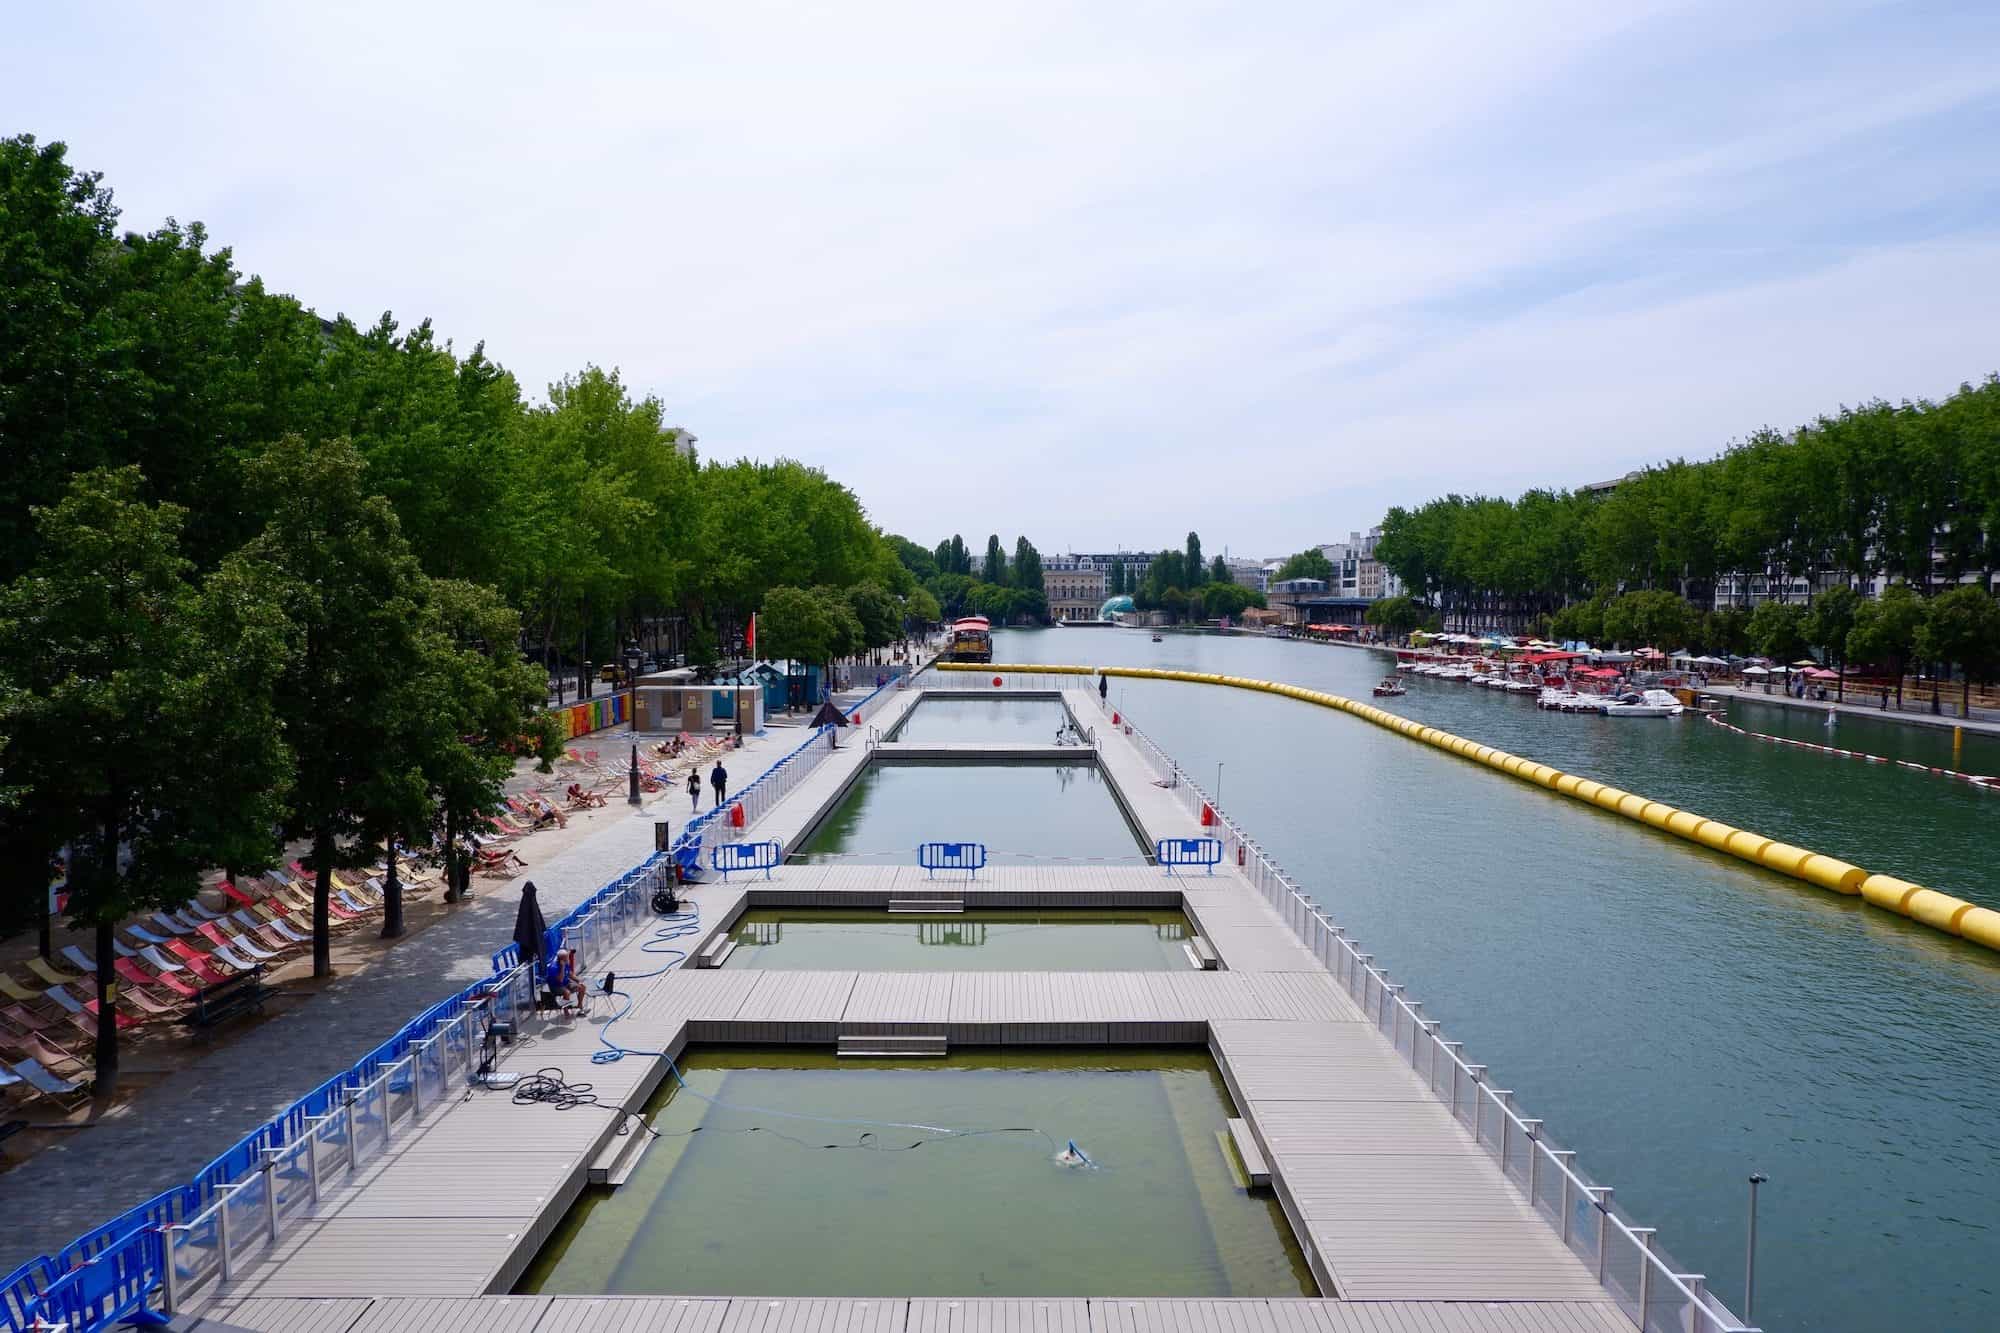 The canal pools at Paris Plages on the Canal de l'Ourcq.